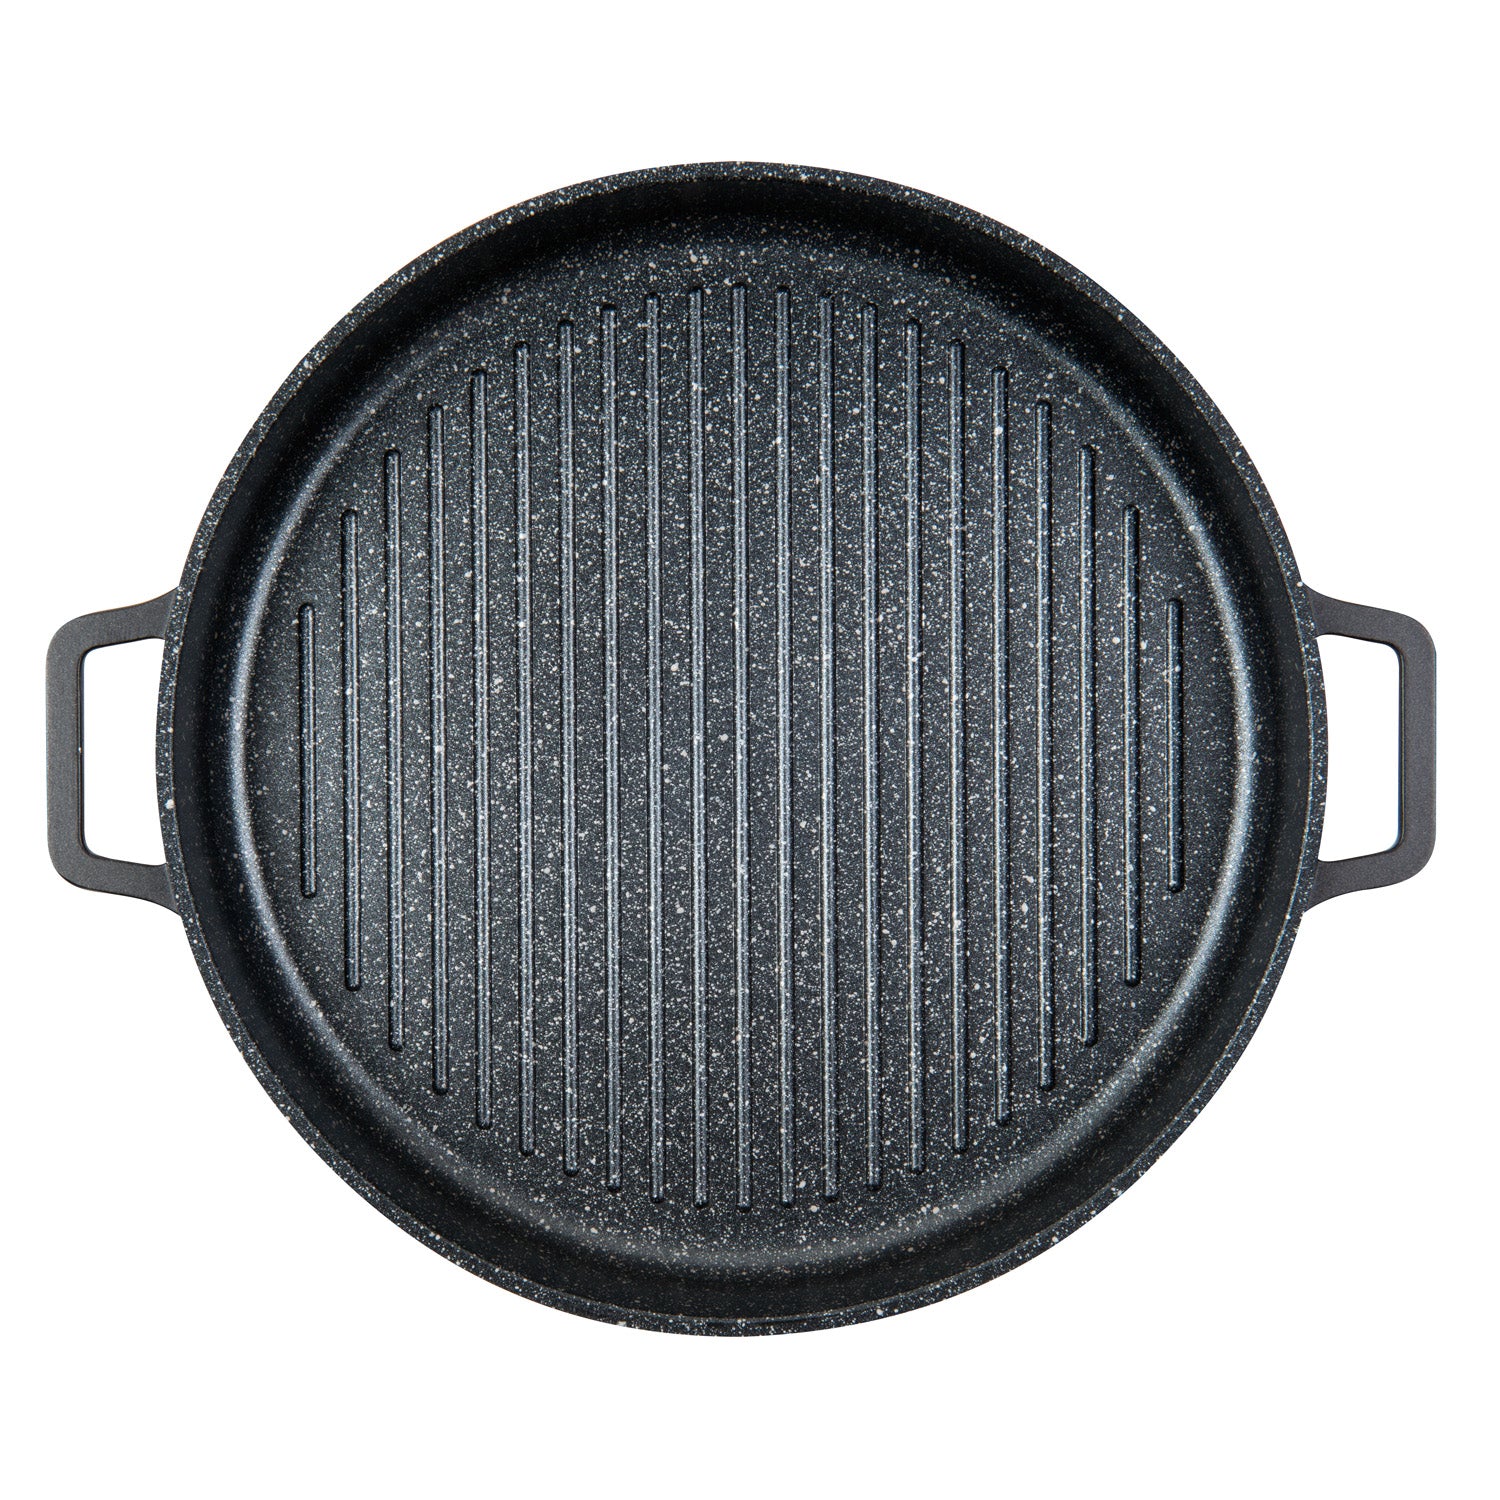 Risa Grill Pan and Soup Pot Lid, Cast Iron, Black, Nonstick for Stovetop,  Oven